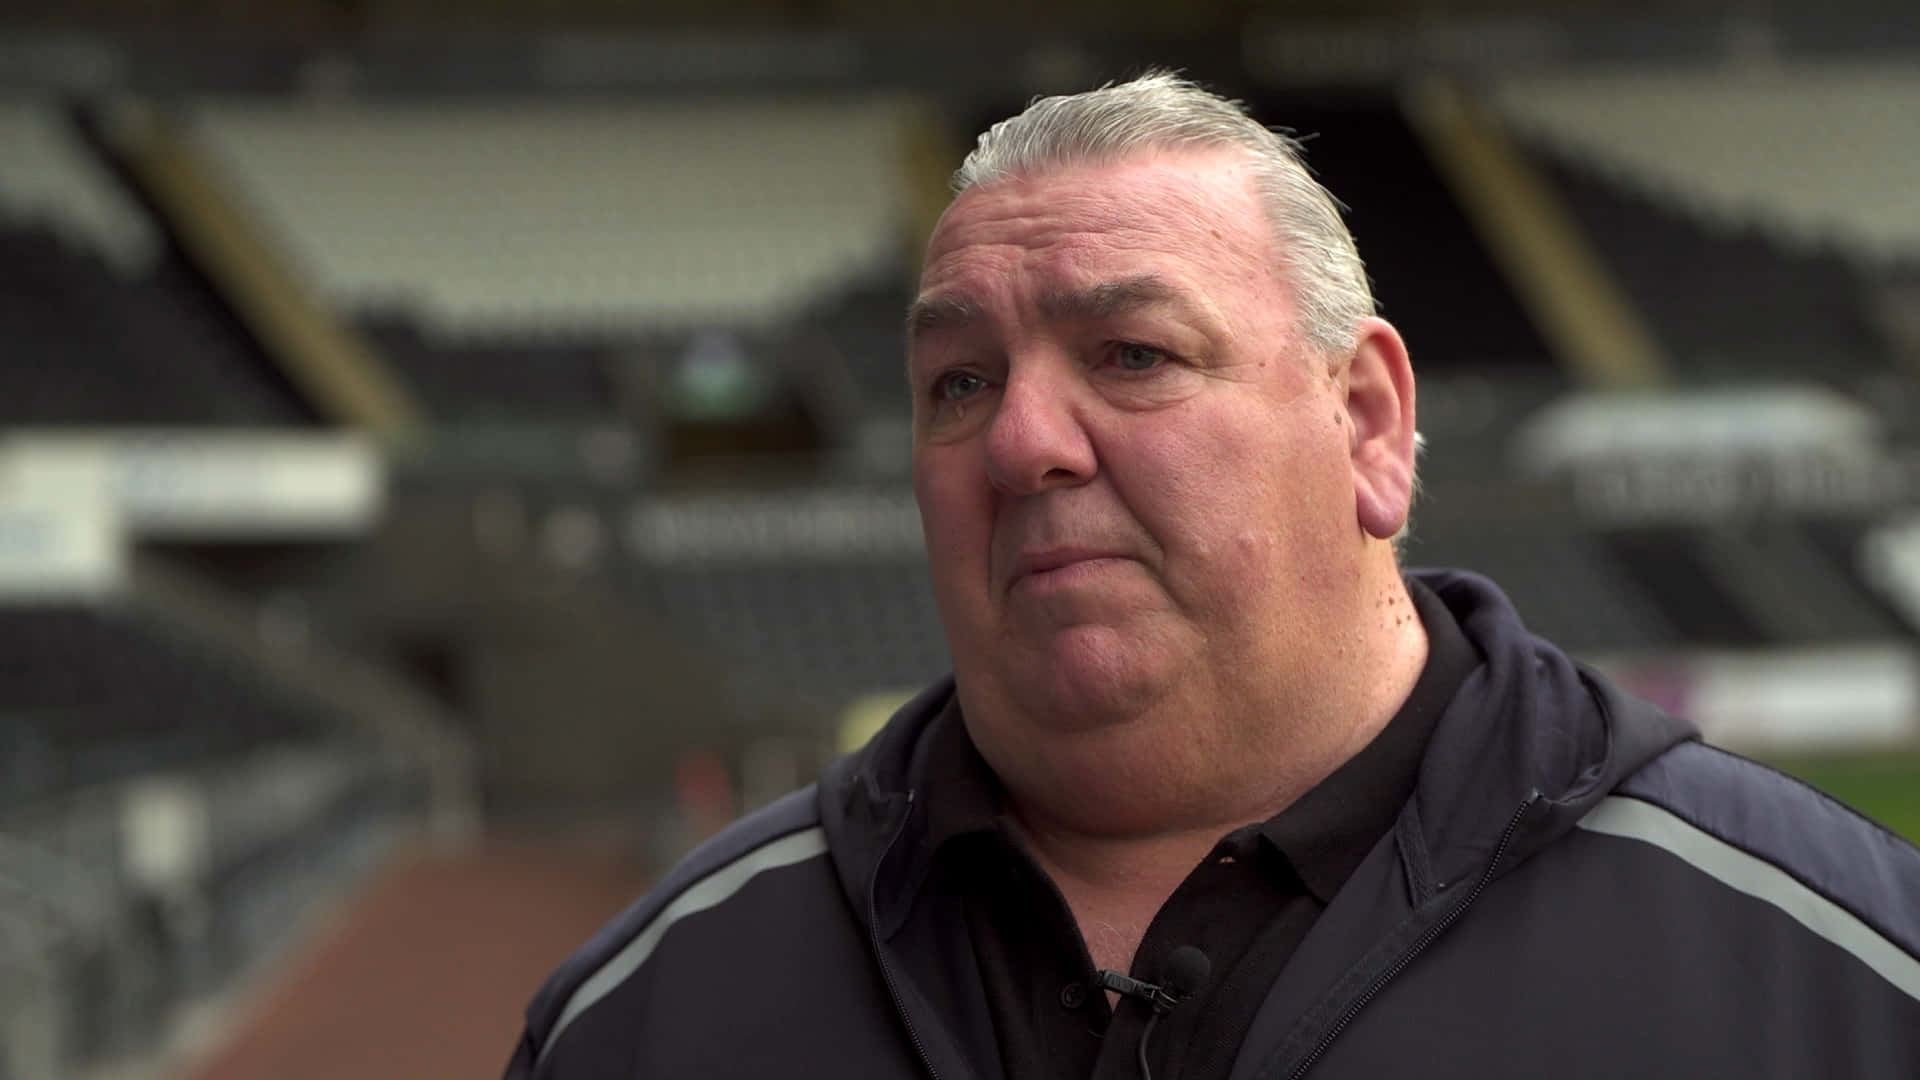 Former Footballer Neville Southall Interview With Football Association Of Wales Wallpaper